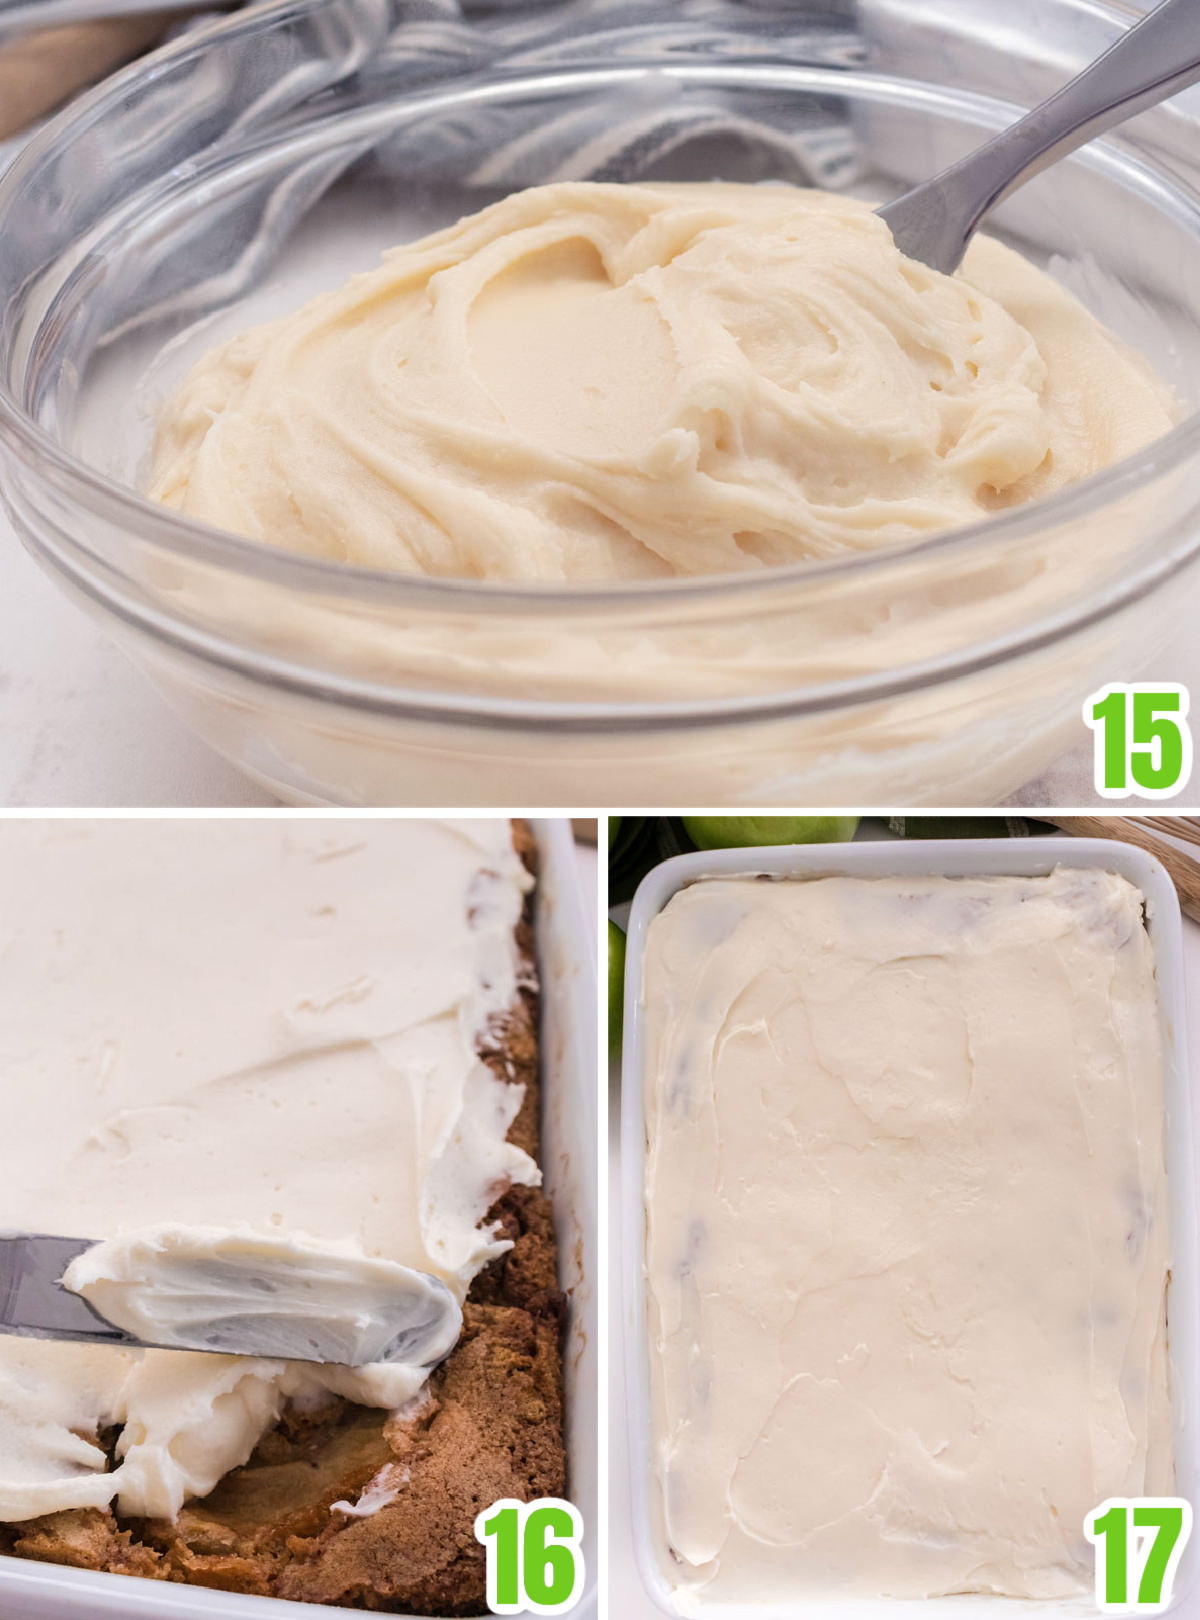 Collage image showing how to Frost the Apple Cake with creamy homemade Cream Cheese Frosting.